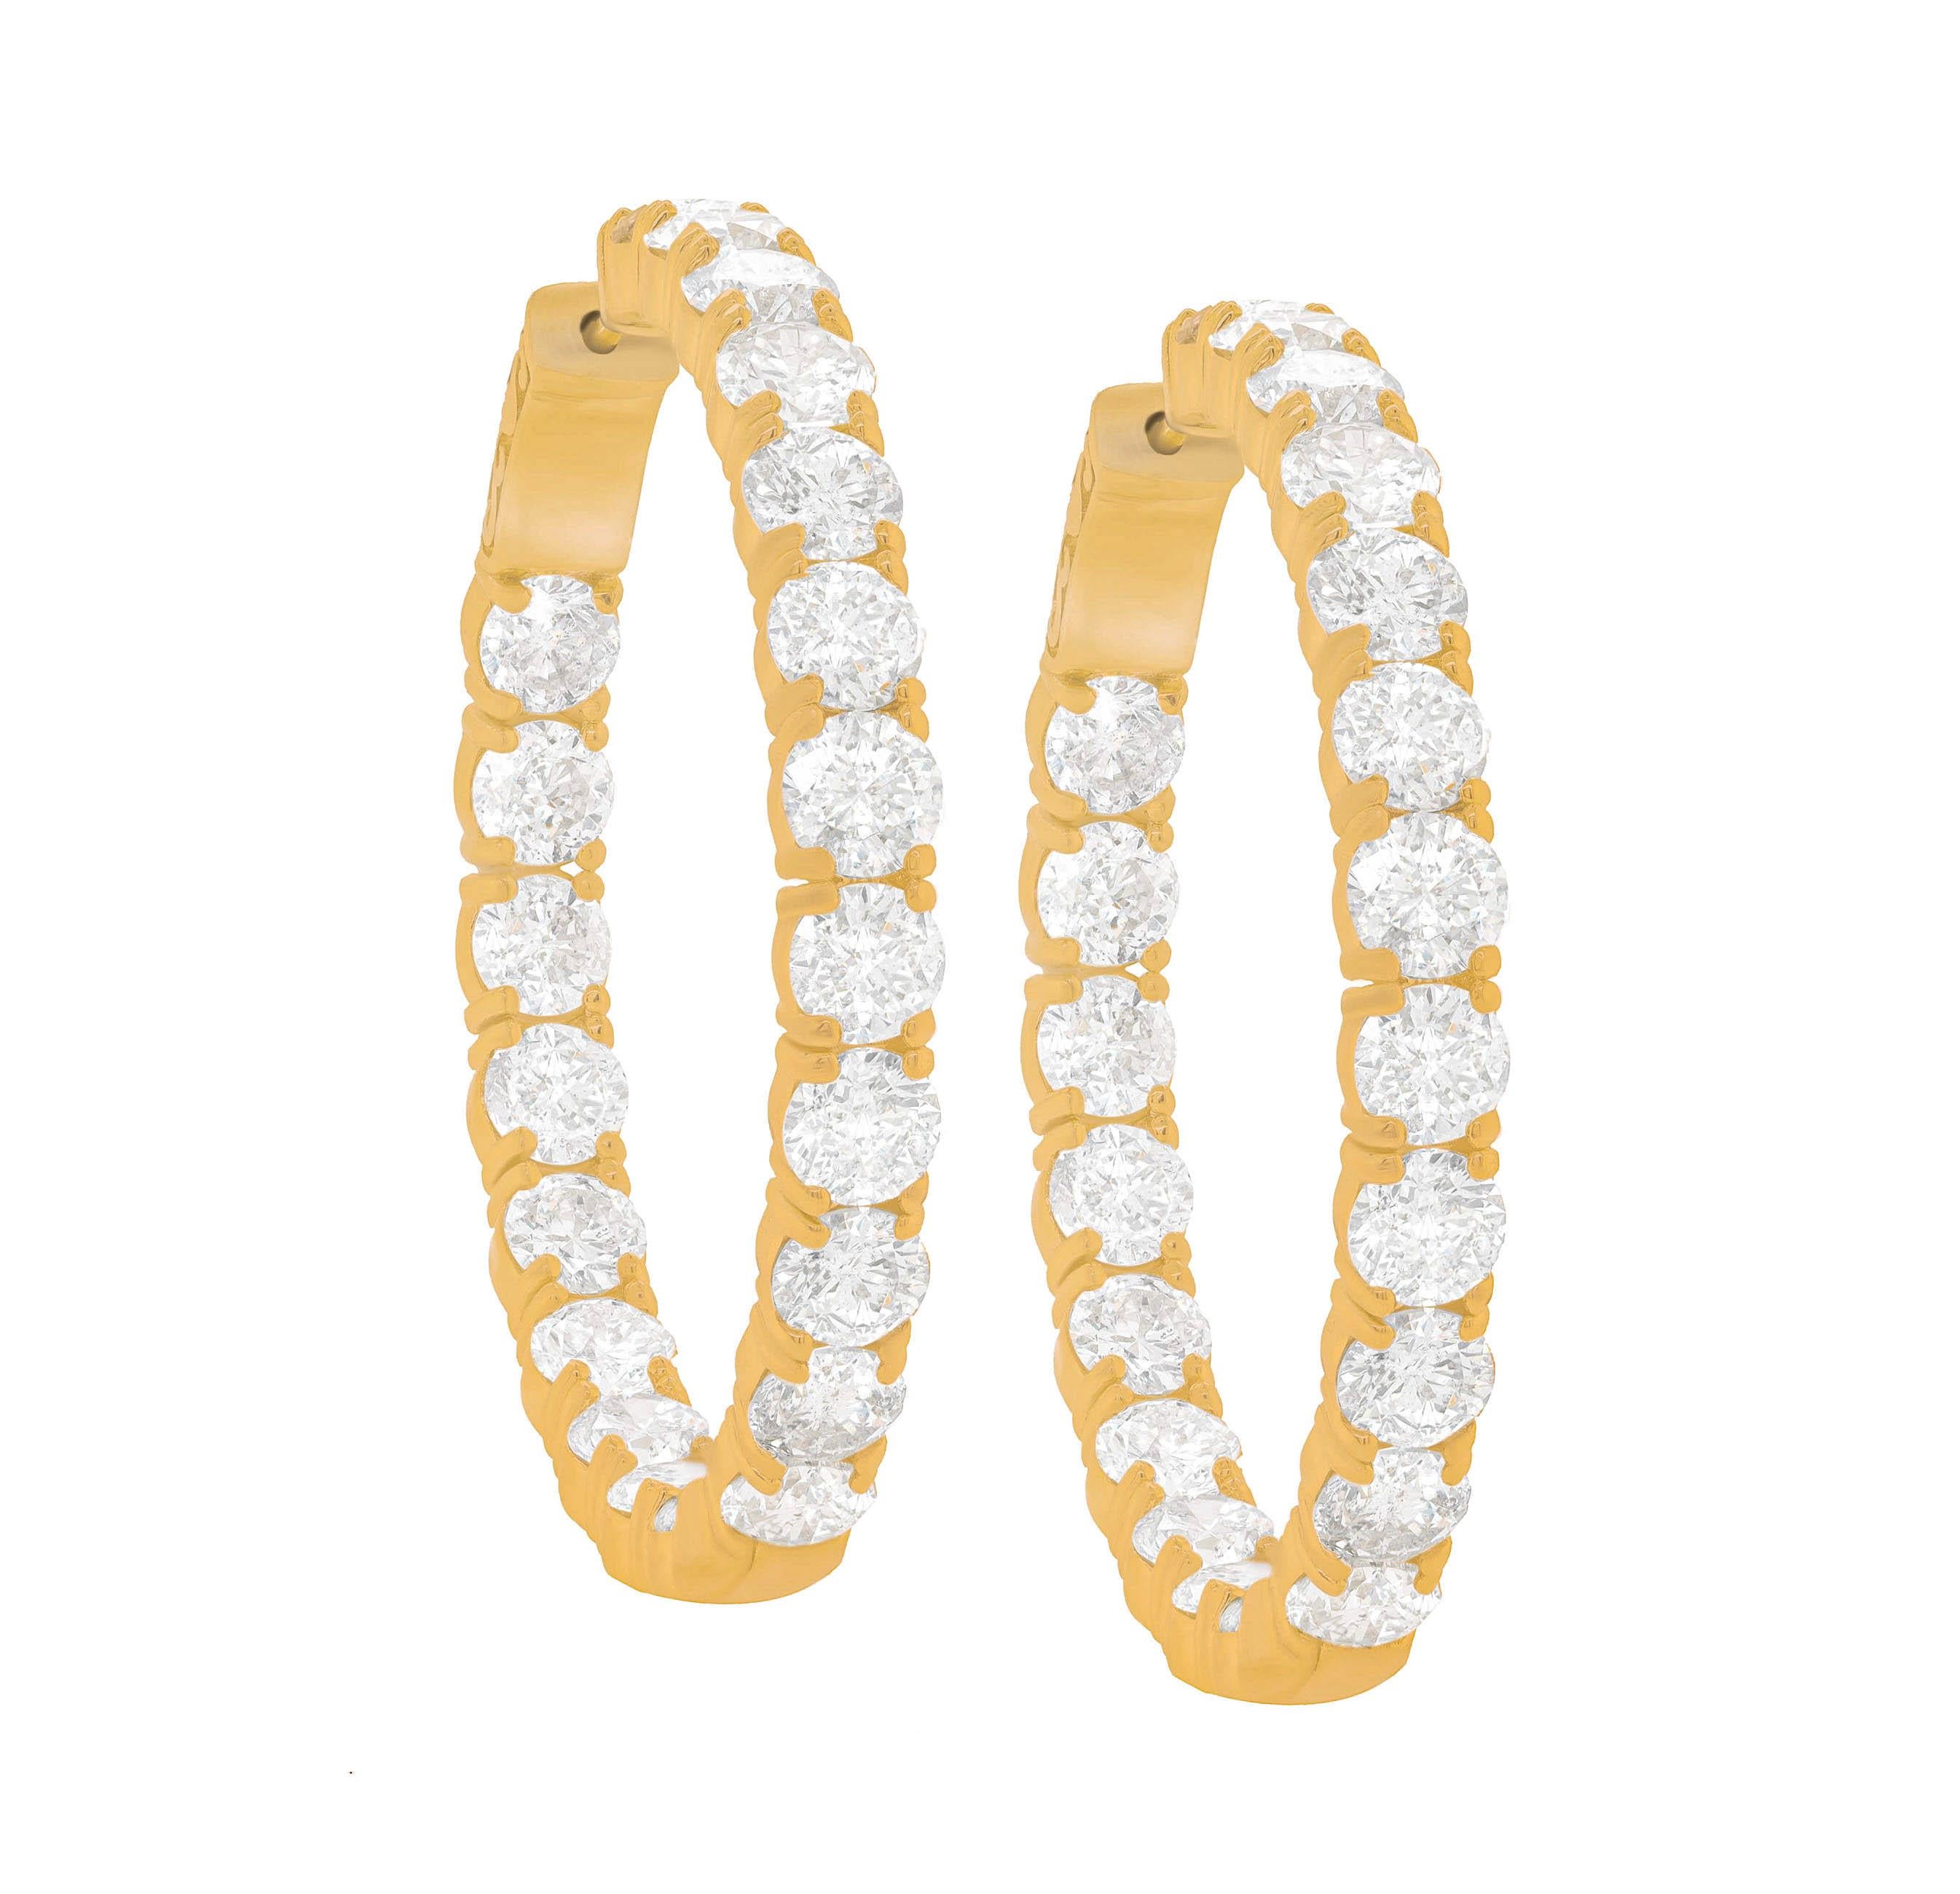 18K Yellow Gold Diamond Earrings featuring 12.80 Carat T.W. of Natural  and White Diamonds

Underline your look with this sharp 18K White and DIAMOND Earrings. High quality Diamonds. This Earrings will underline your exquisite look for any